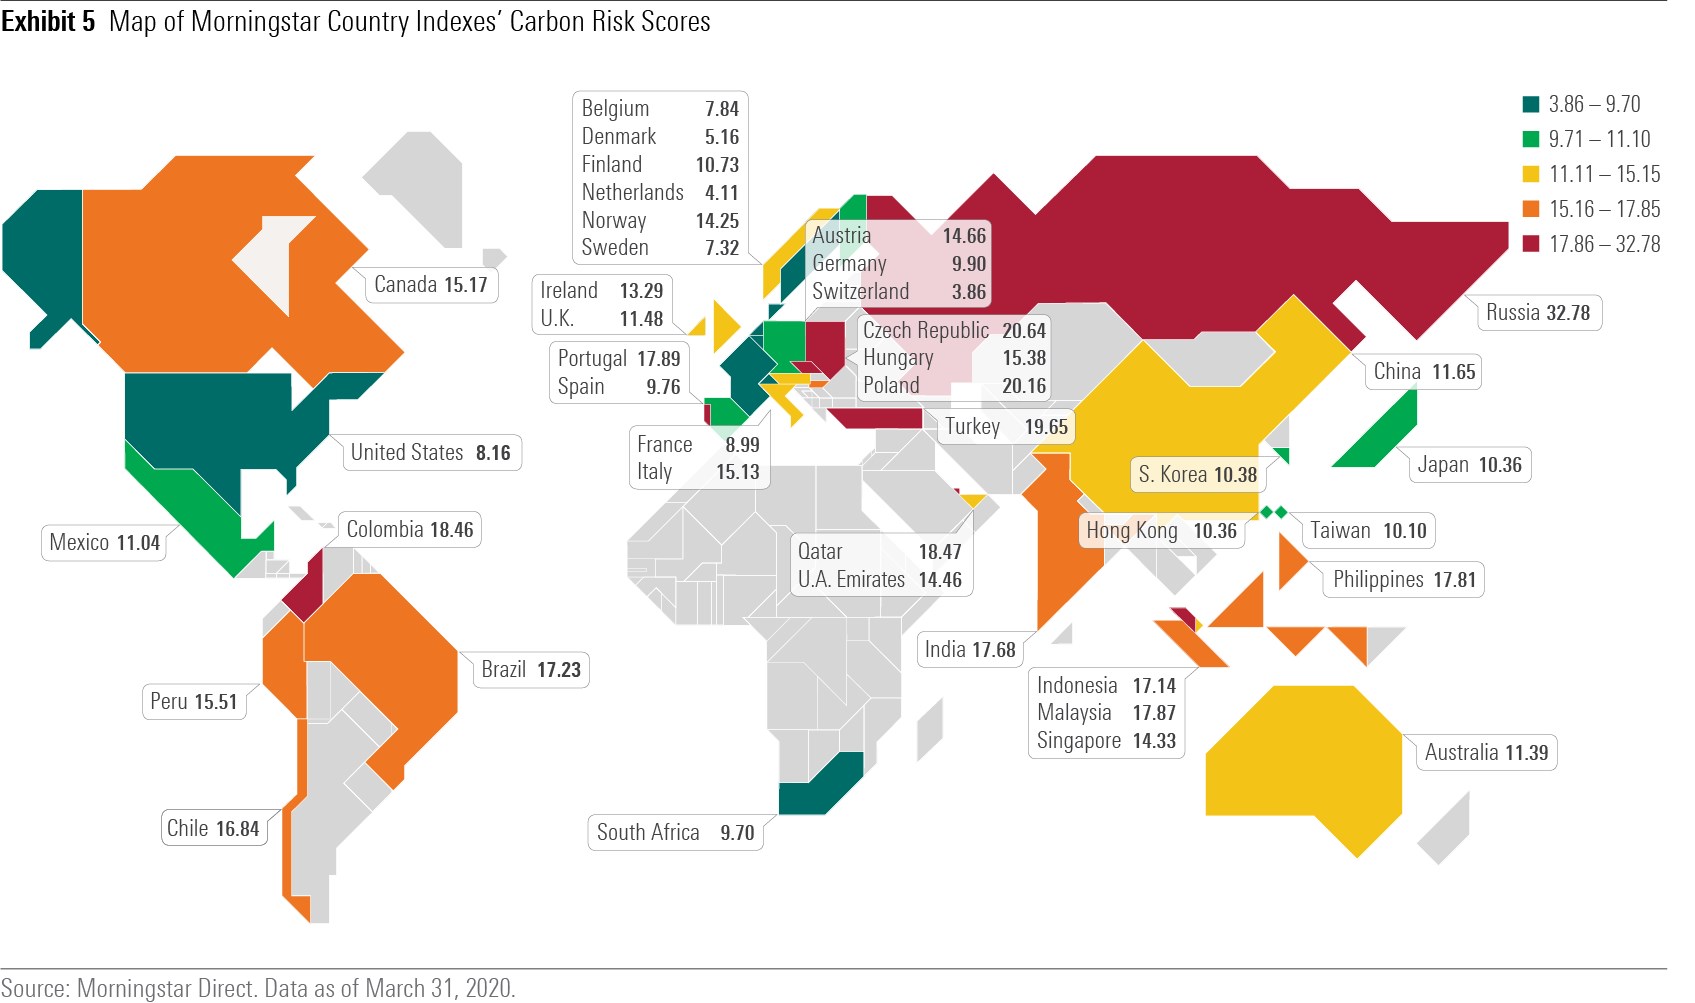 Sustainability 2020 H1 Carbon Risk Map